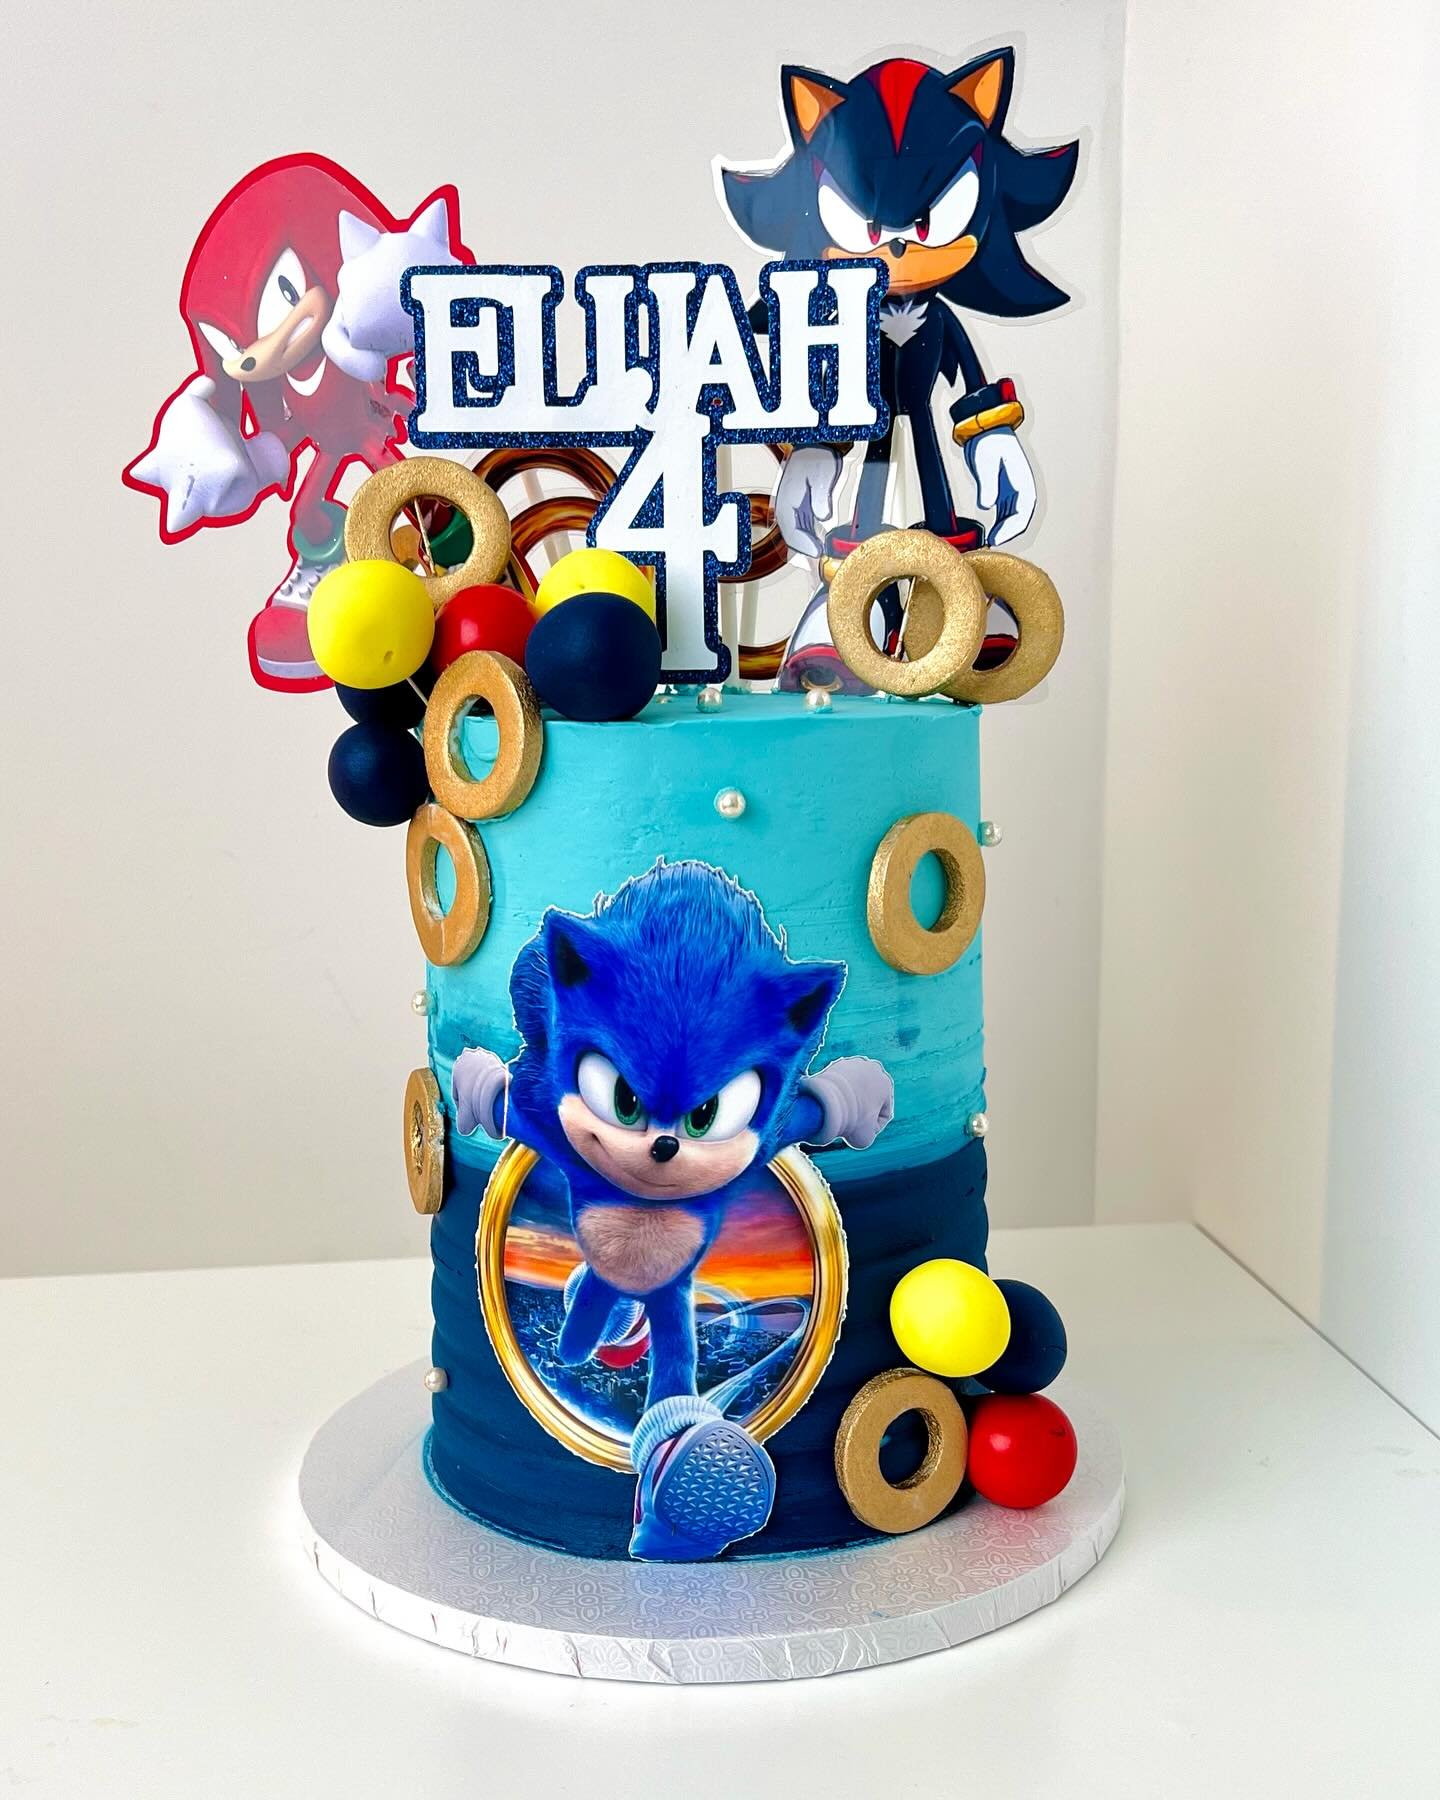 Sonic Theme Cake for Elijah&rsquo;s 4th!!
Layers of vanilla sponge in colour blue and red velvet cake.
Need a cake for your next event, please hit the link in the bio!

#soniccake #hampshirebaker #southamptonbaker #southamptoncakes